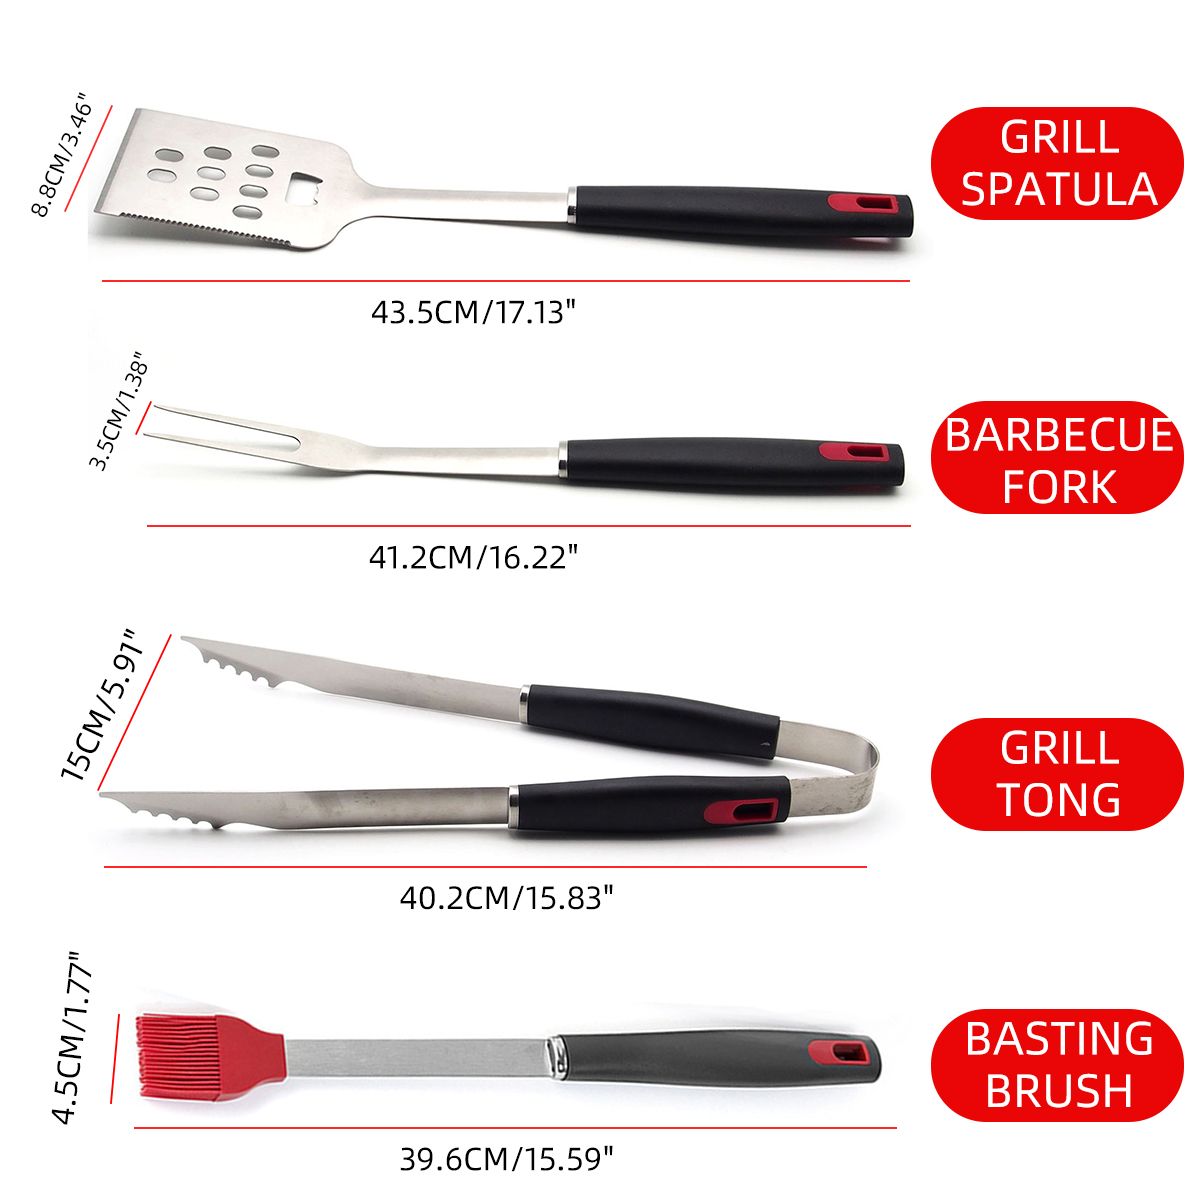 4PCS-BBQ-Stainless-Steel-Barbecue-Utensils-Kit-Outdoor-Grill-Tools-Brush-Tong-Tools-Kit-1708219